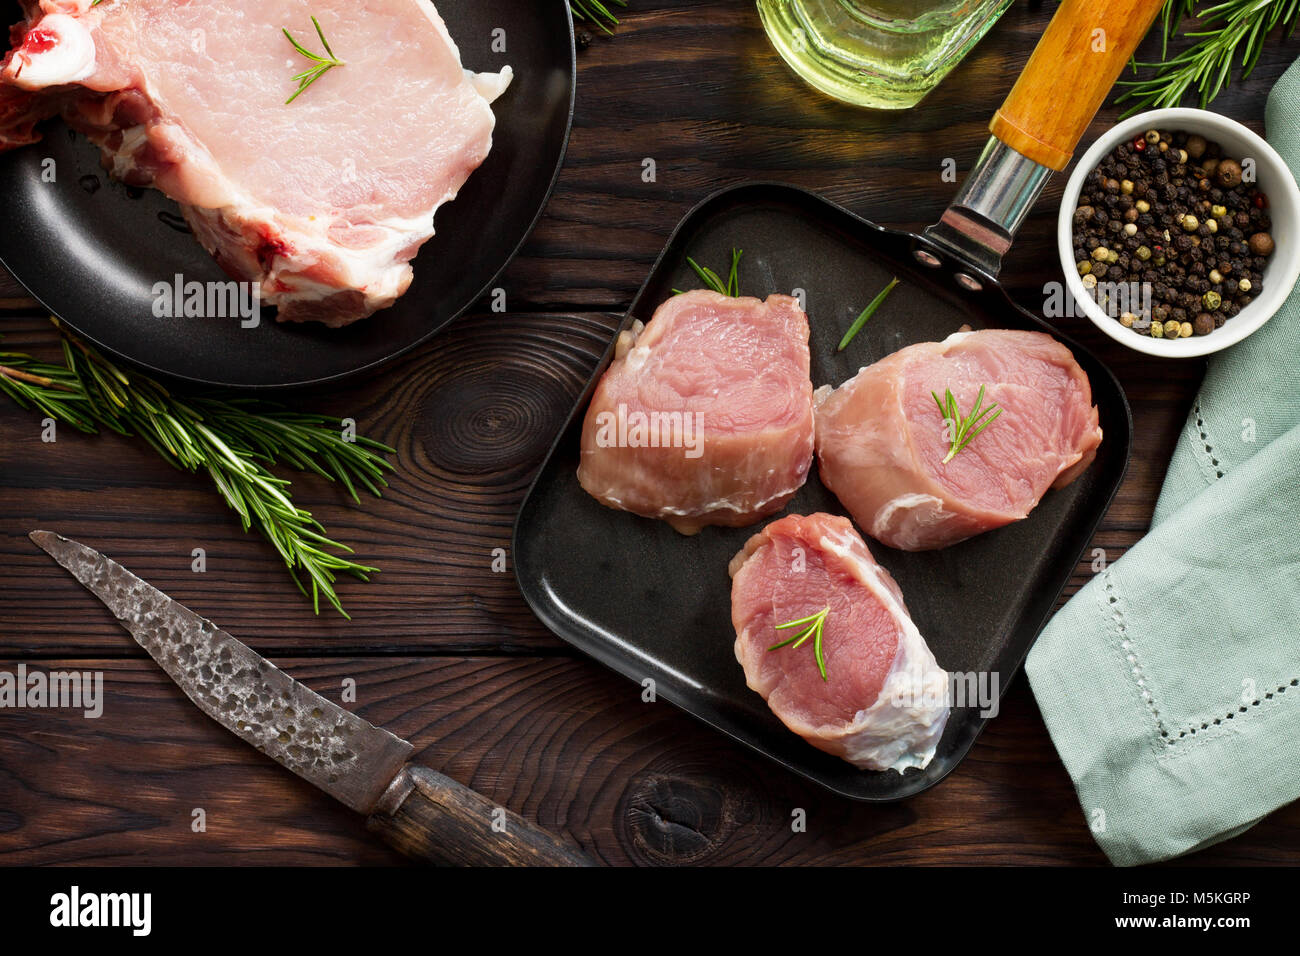 Fresh various meat. Raw pork steak and cutlets on a cast iron frying pan, spices and fresh rosemary on a kitchen wooden table. Stock Photo